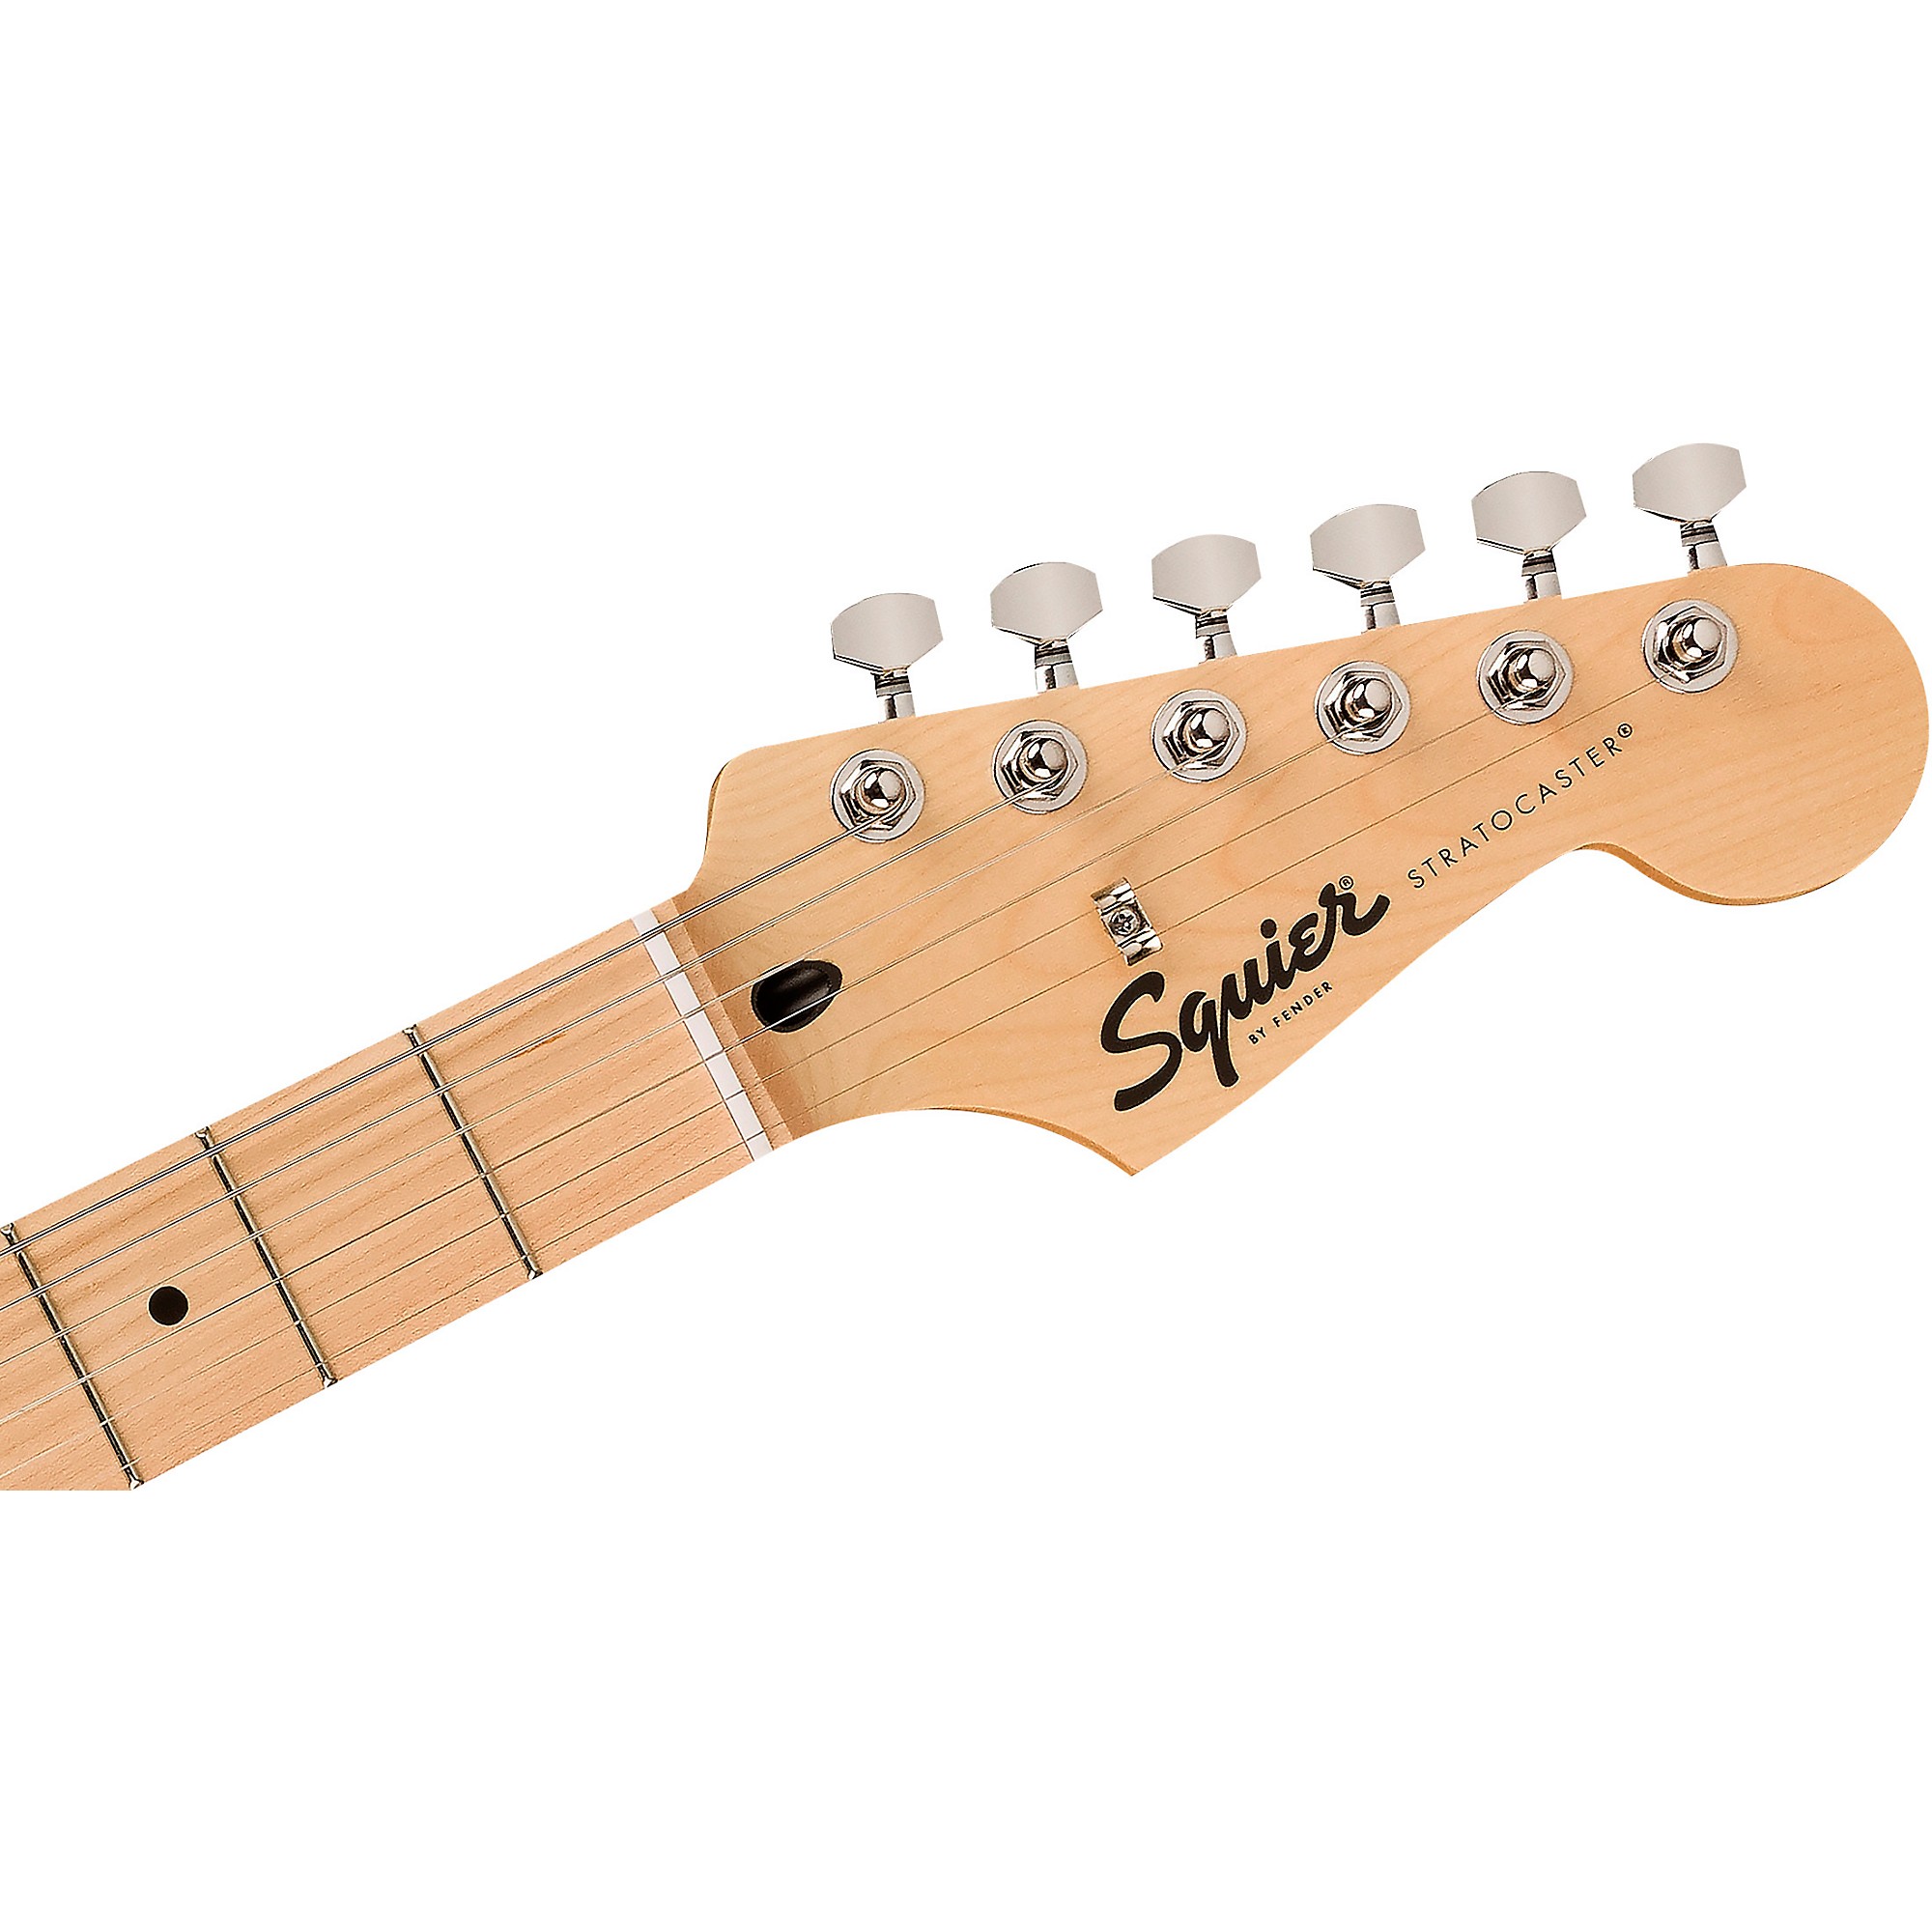 Fawley Music - Squier Affinity Stratocaster Surf Green